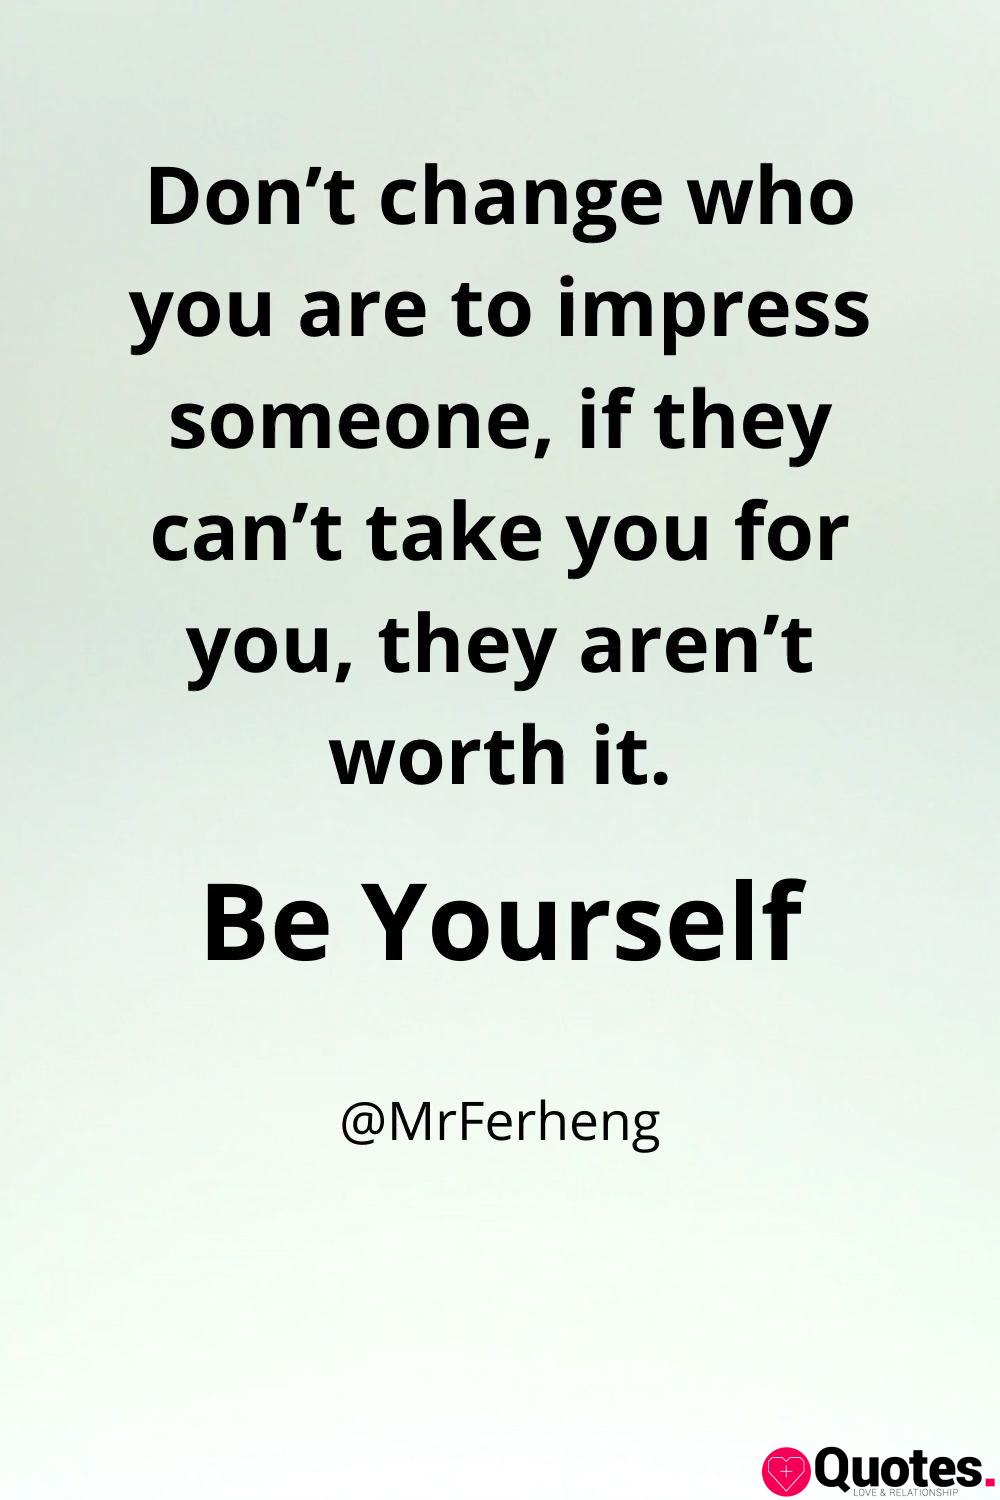 Don't try to impress anyone